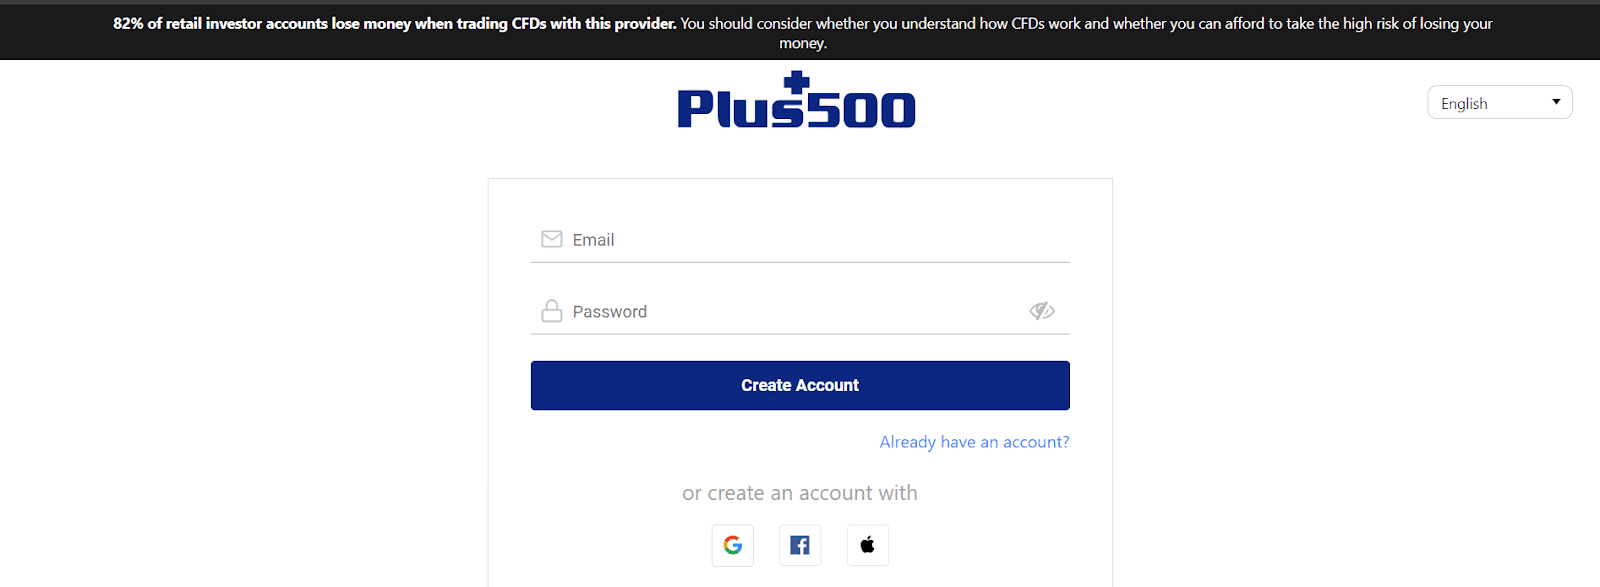 Review of Plus500’s User Account — Create an Account